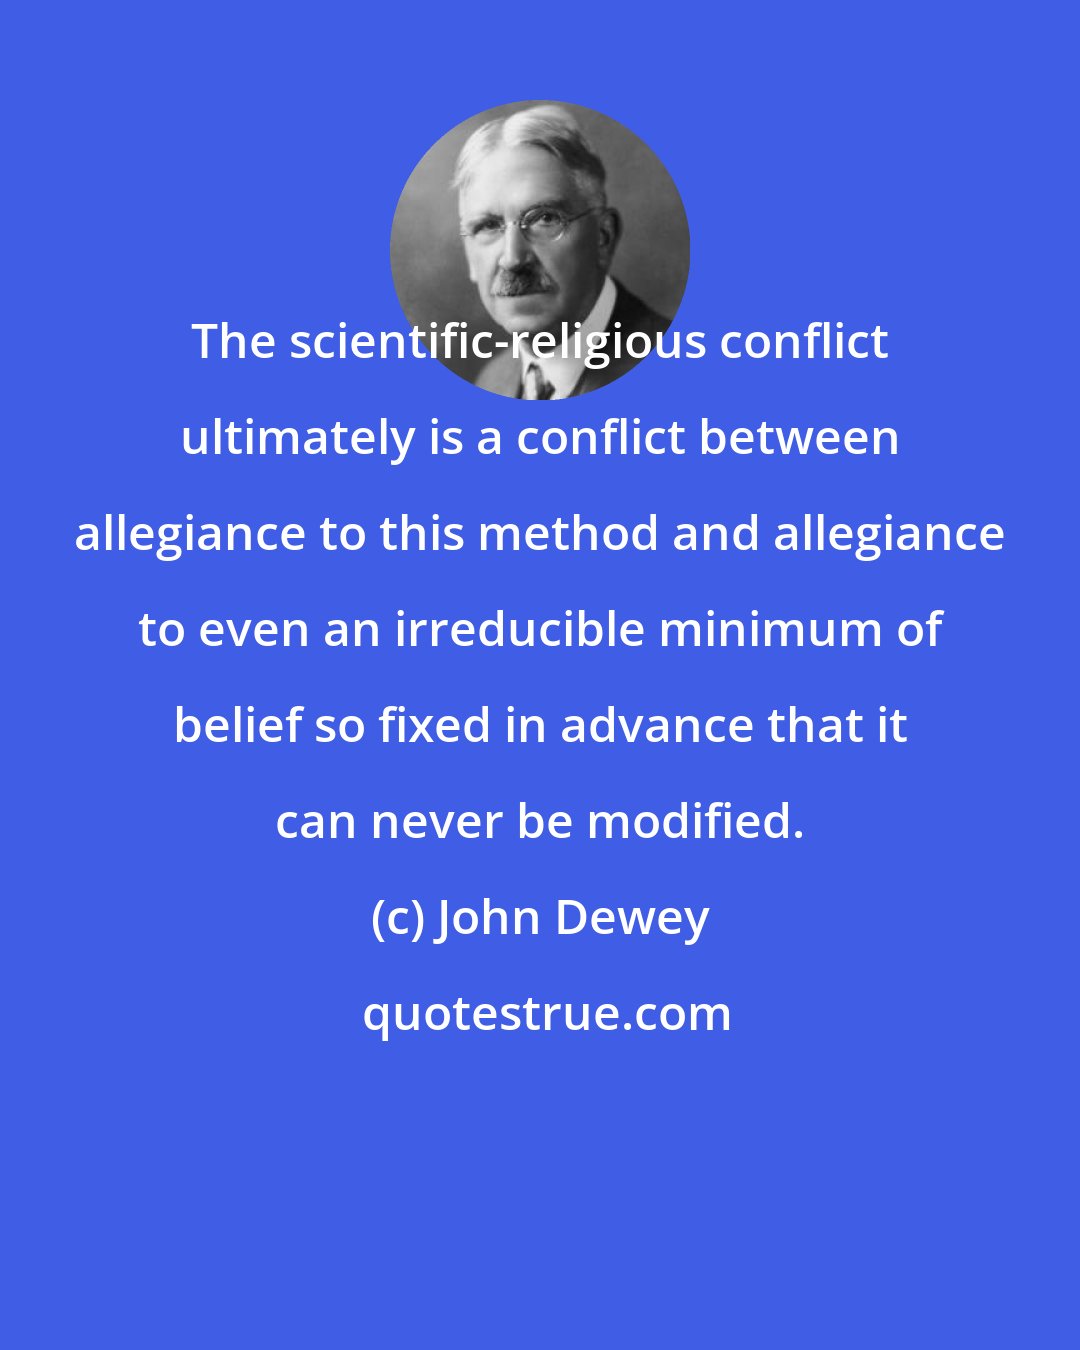 John Dewey: The scientific-religious conflict ultimately is a conflict between allegiance to this method and allegiance to even an irreducible minimum of belief so fixed in advance that it can never be modified.